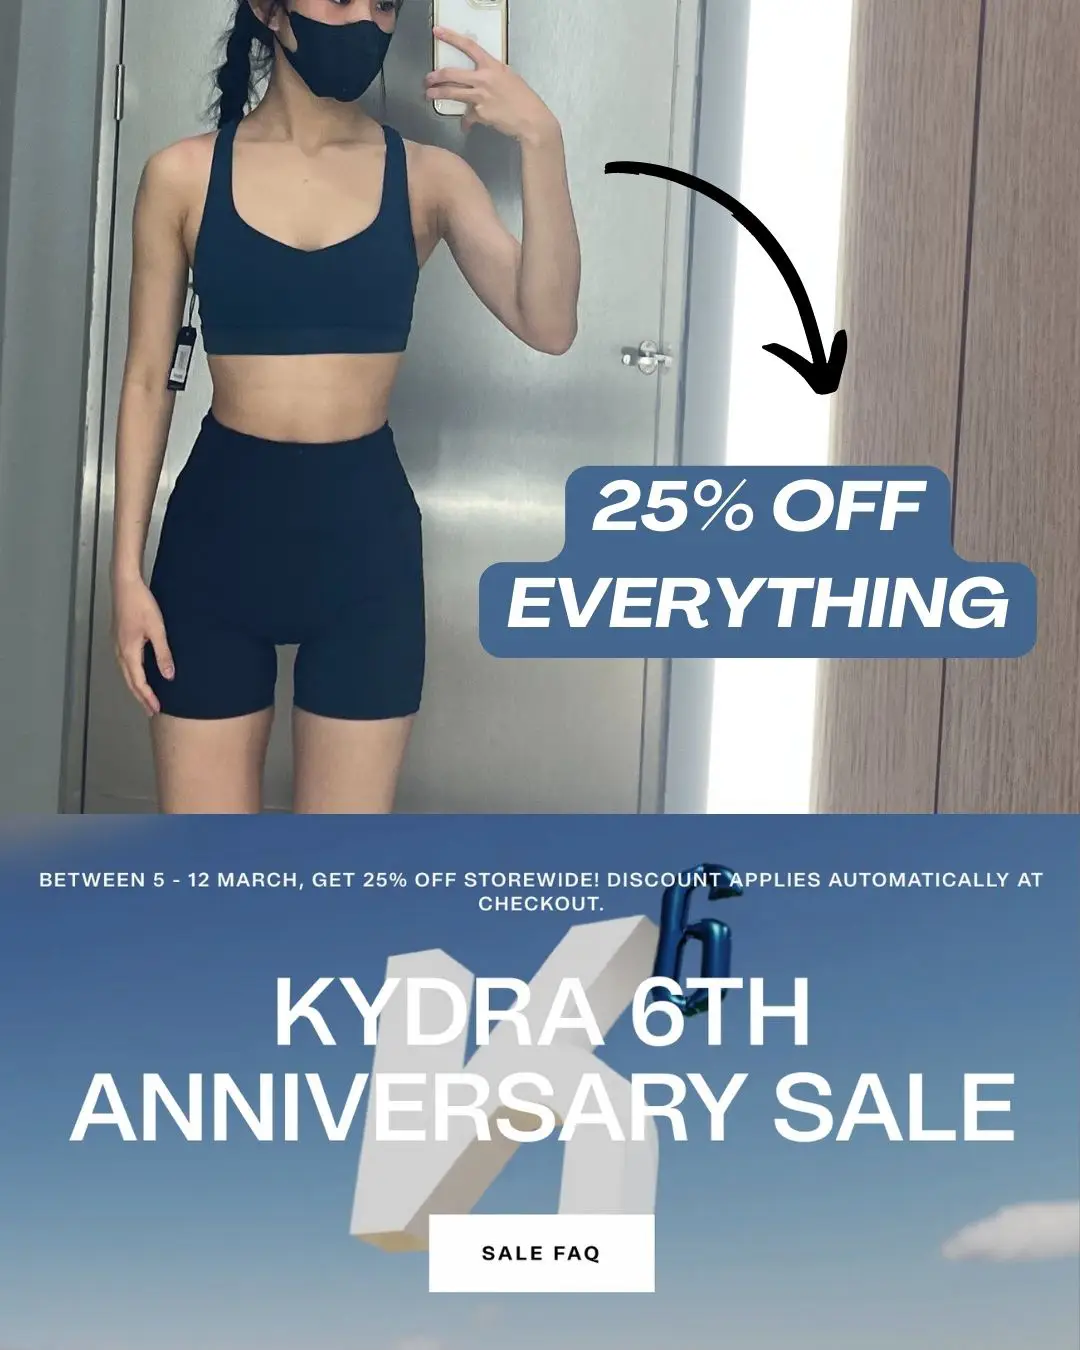 gym girls.. RUN to KYDRA for 25% off everything! 😭